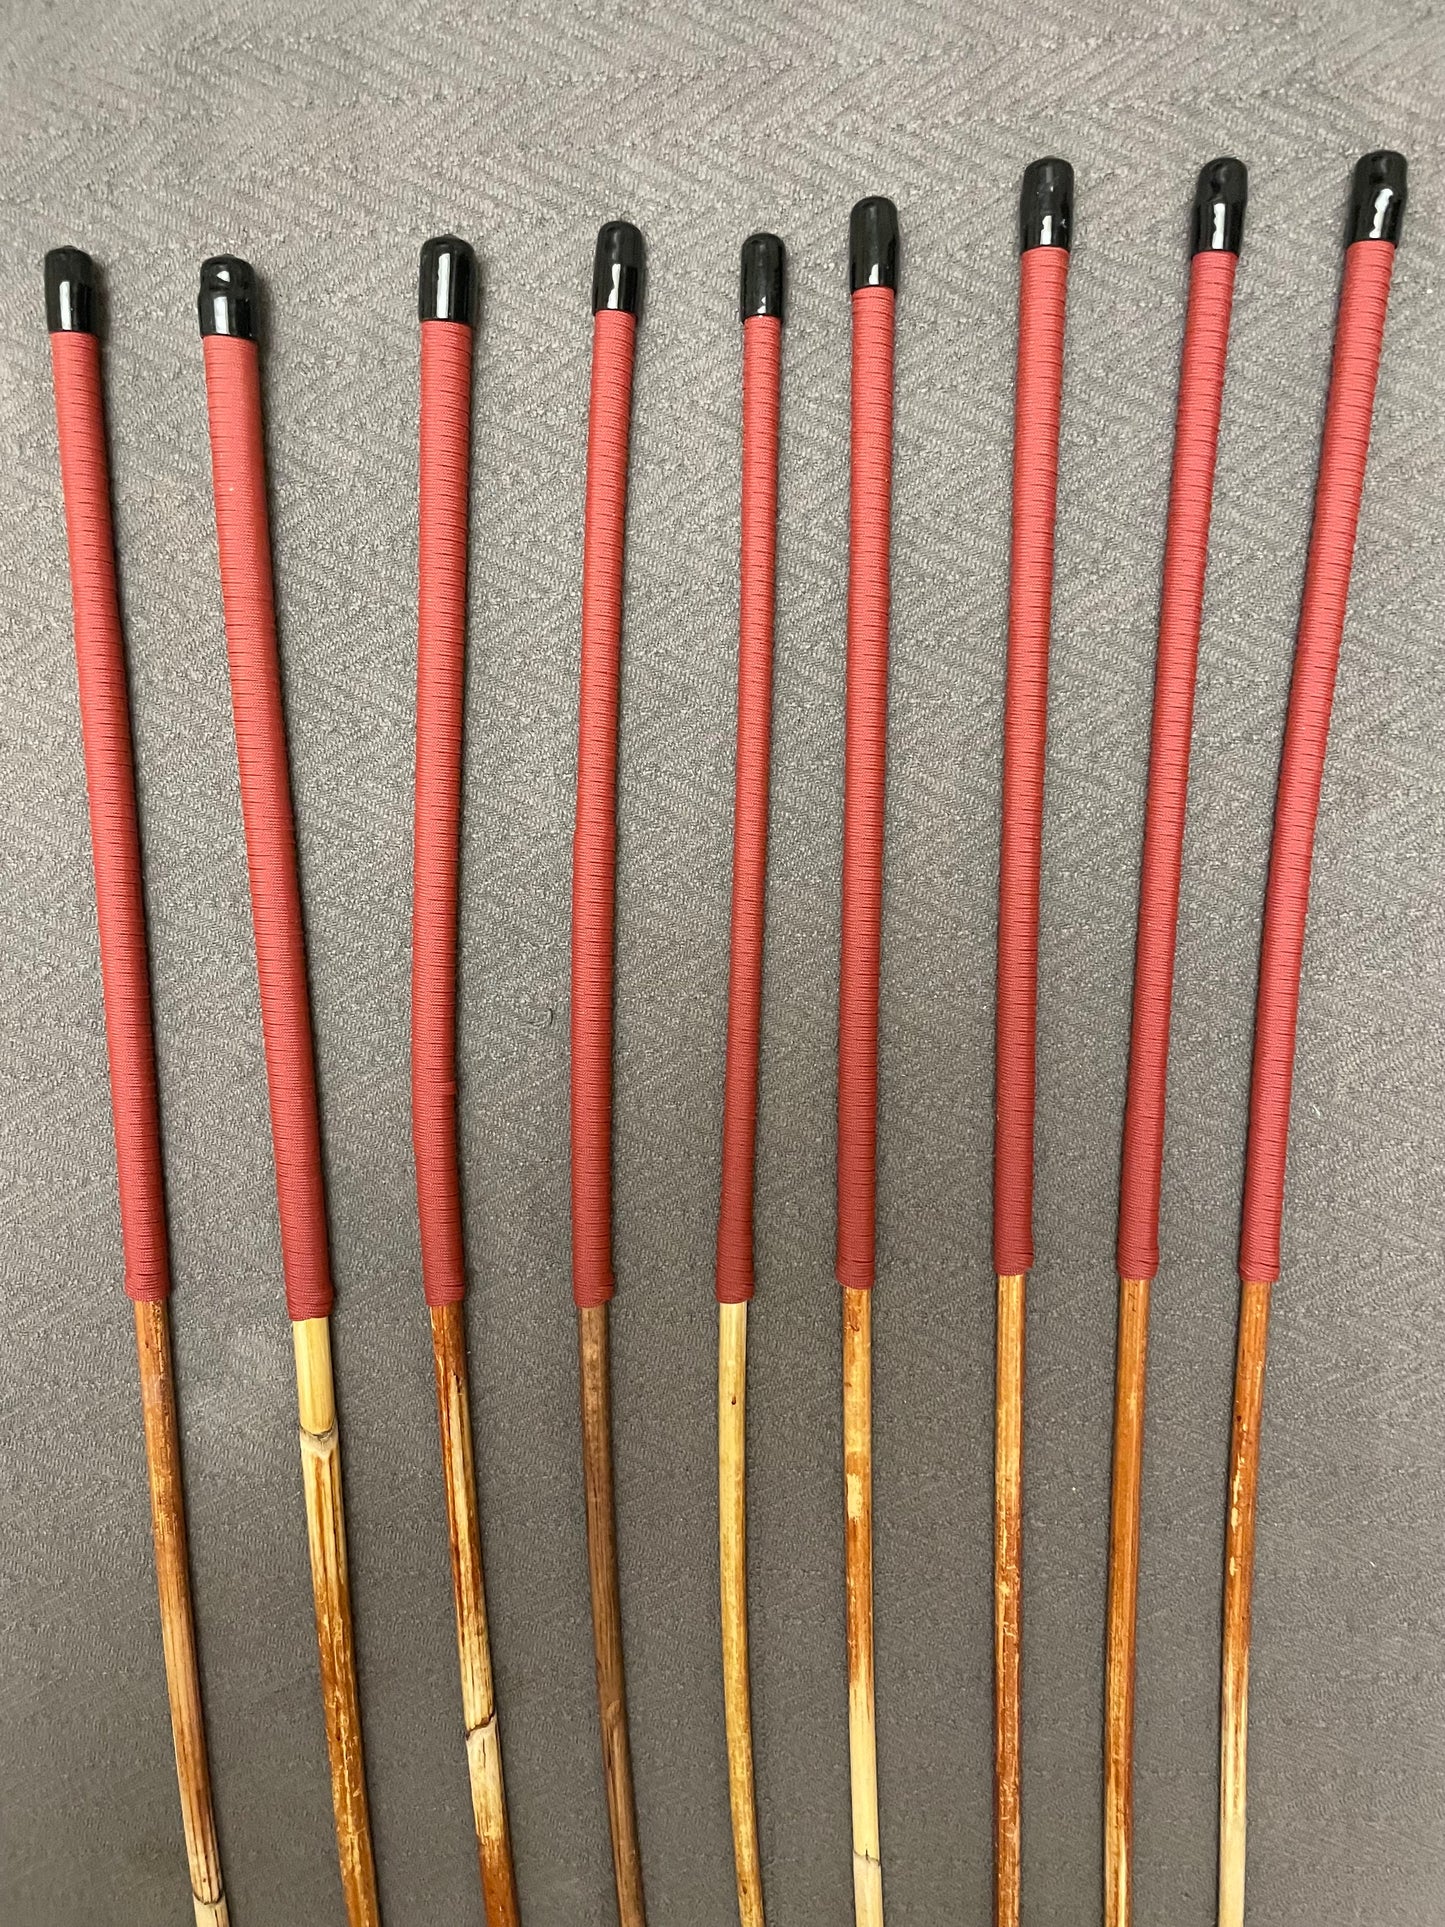 Set of 9 Classic Dragon Rattan Punishment Canes / BDSM Canes with Brick Red Paracord Handles - 95 cms Length - Englishvice Canes